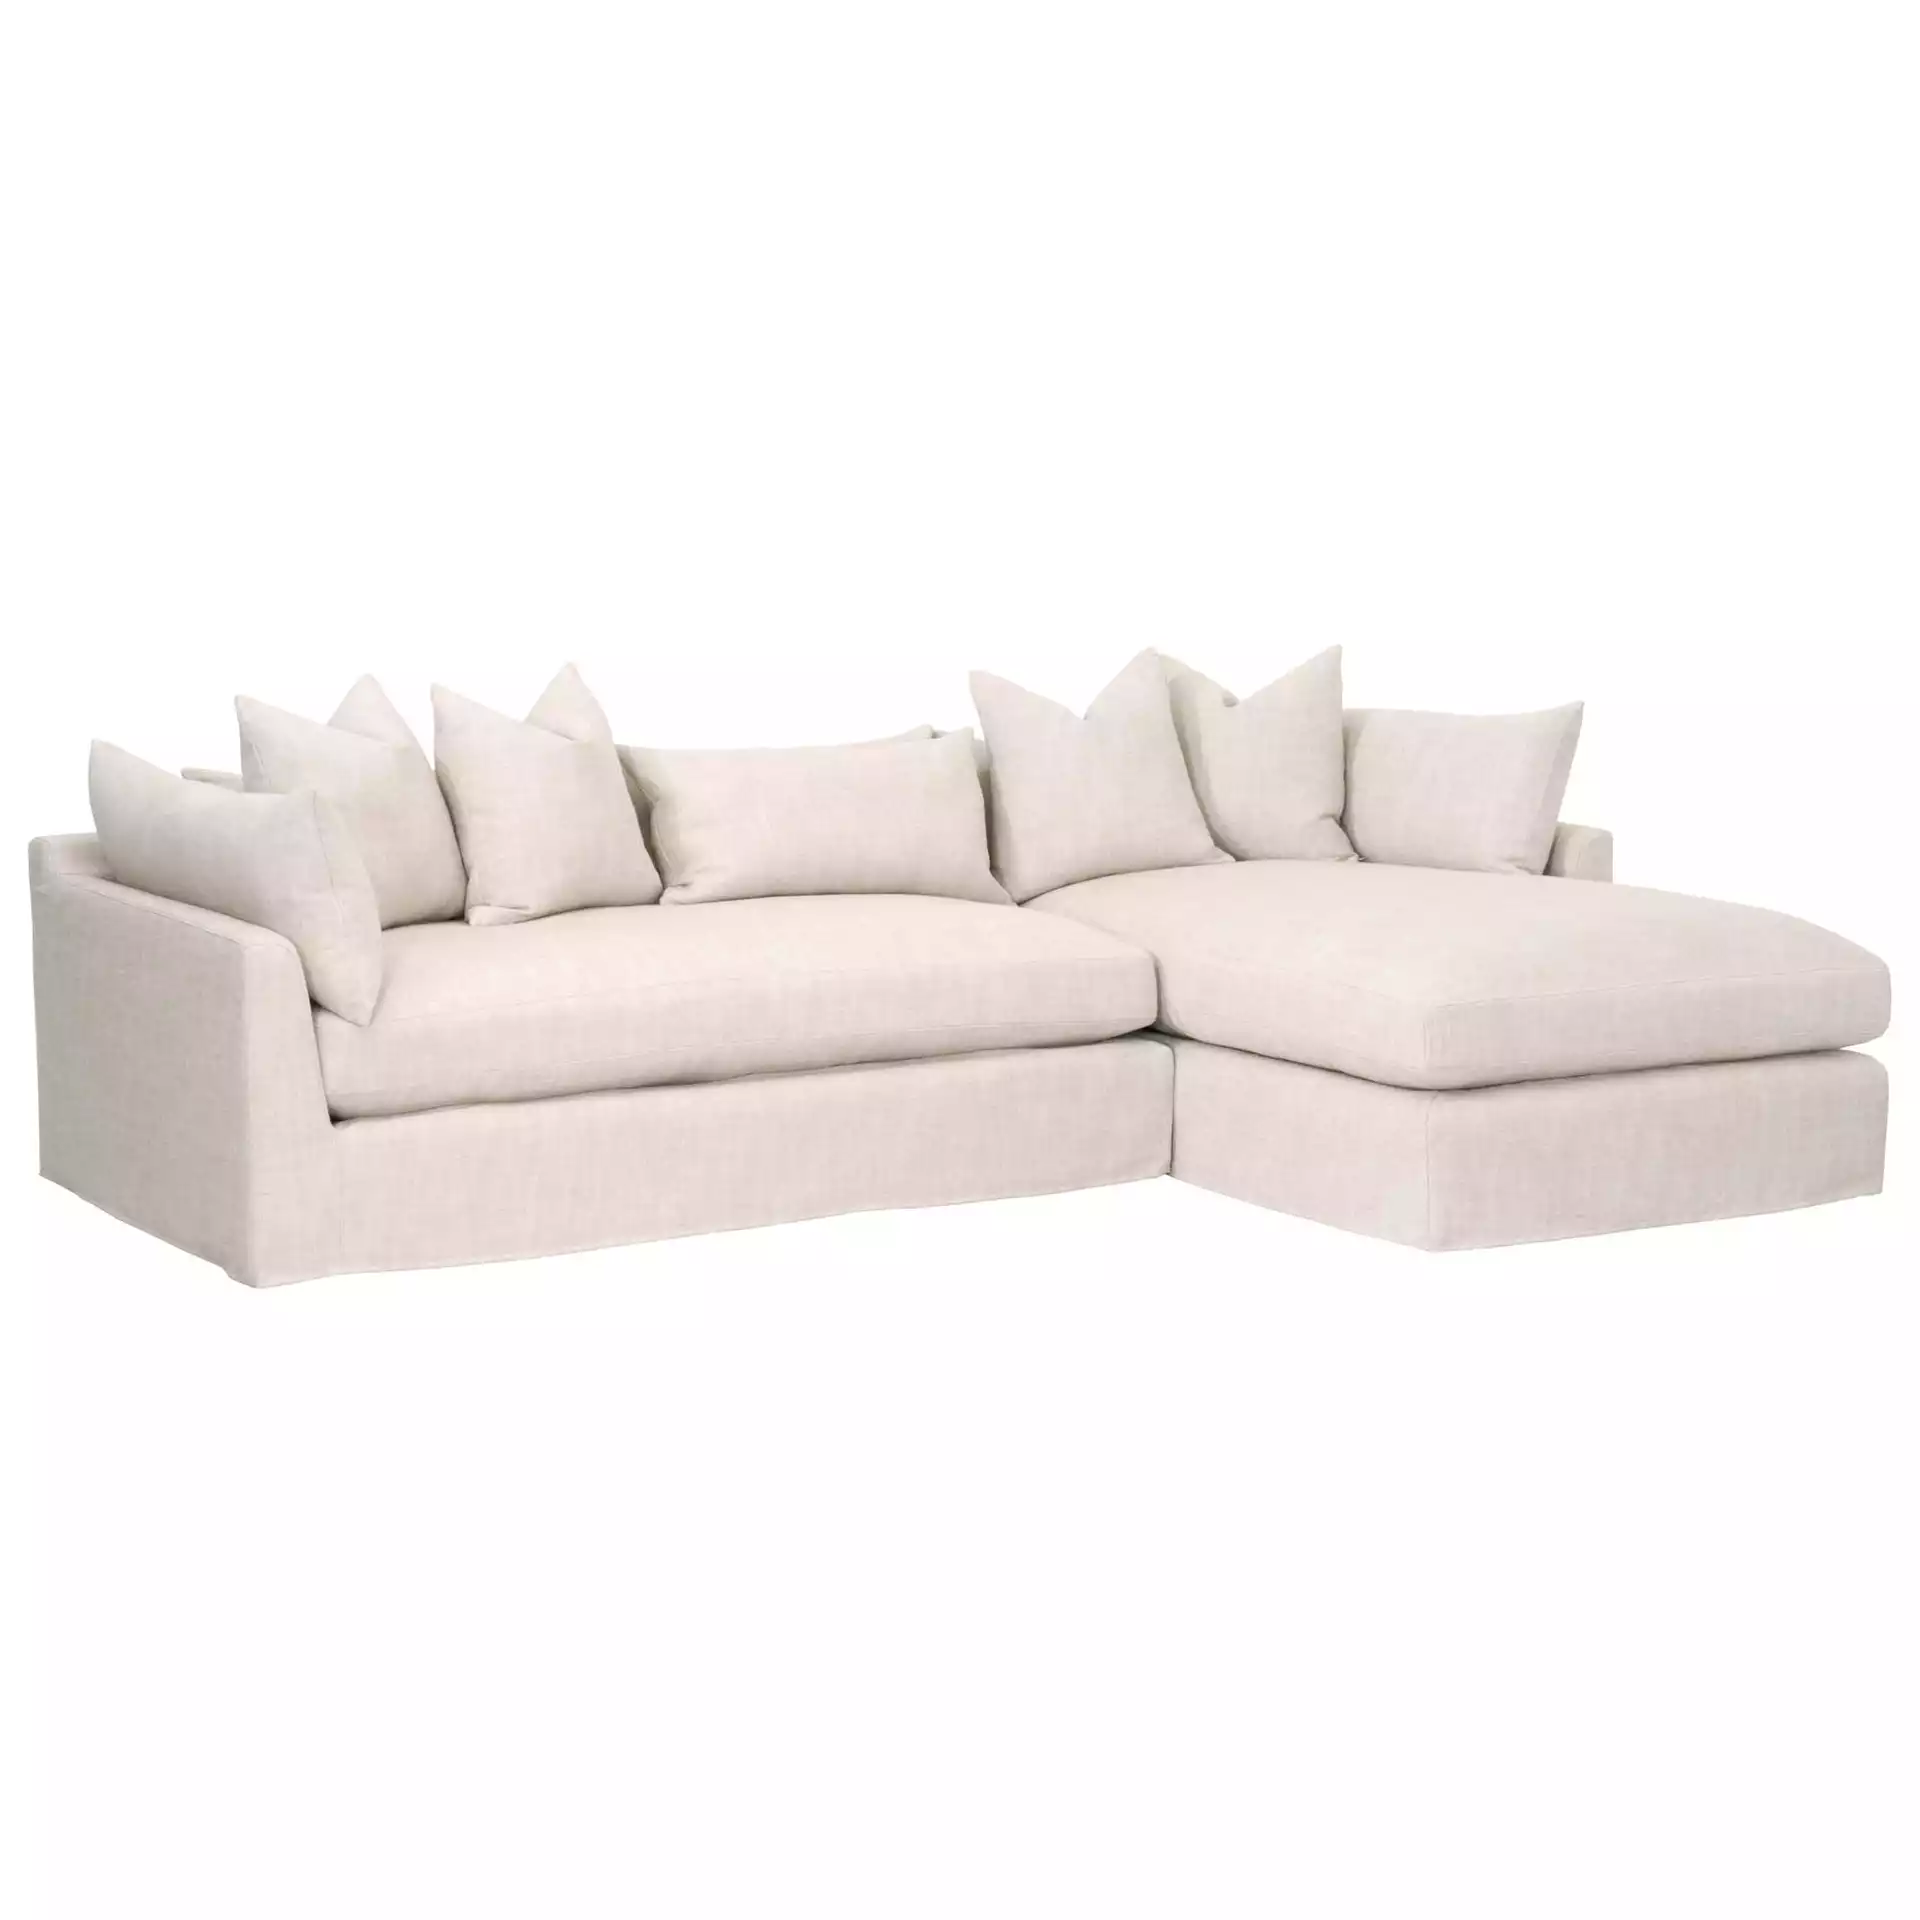 Haven 110" Right Facing Lounge Slipcover Sectional, Bisque, Espresso